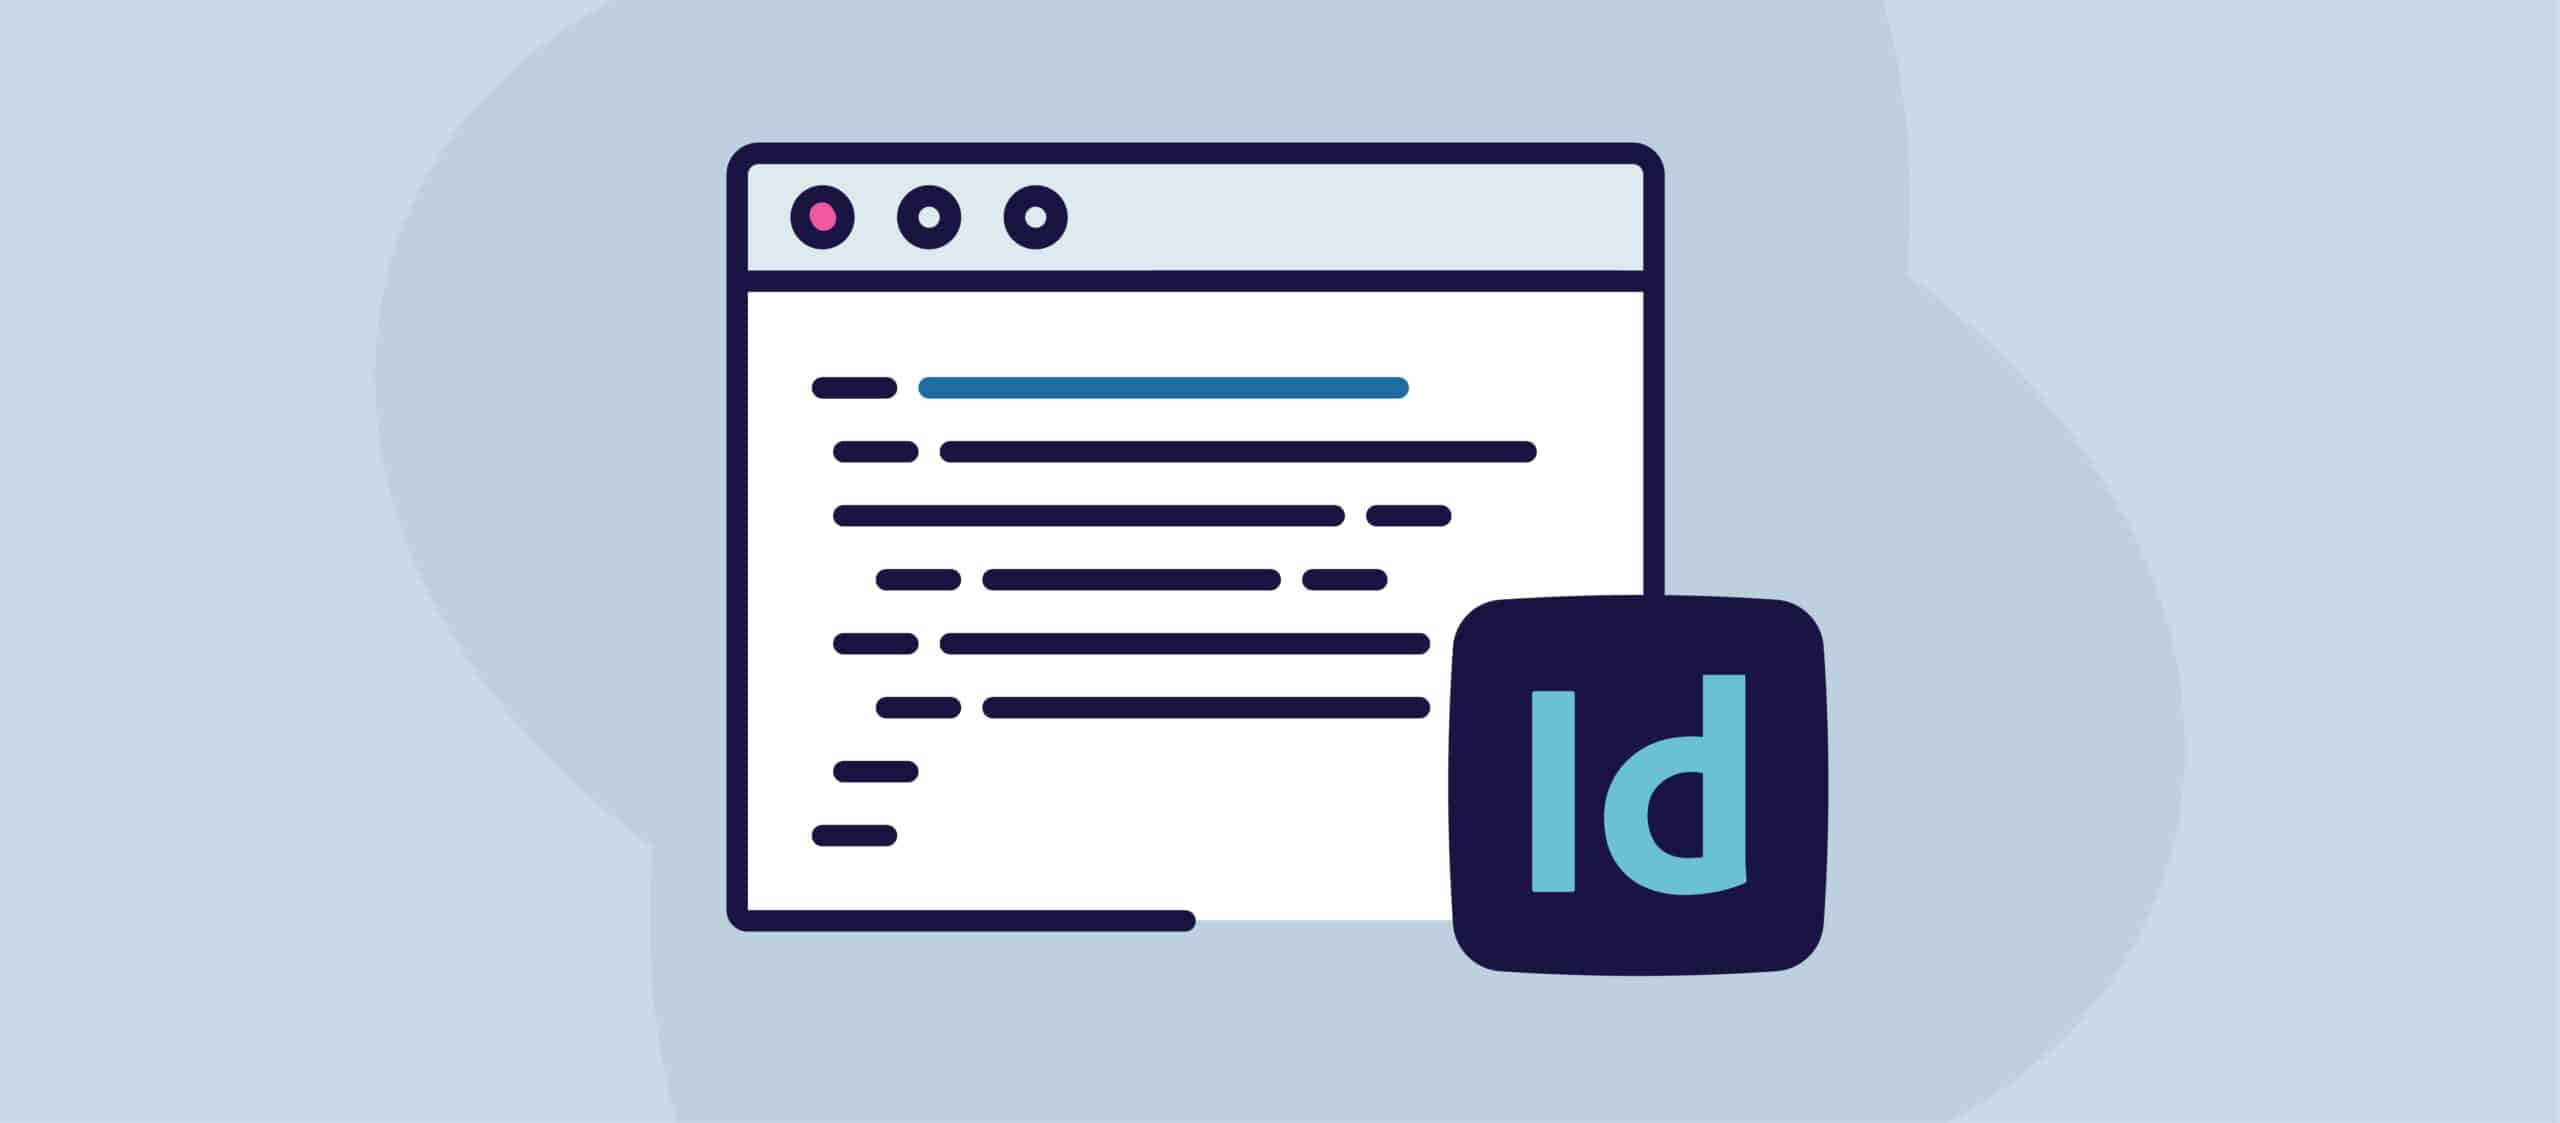 An illustration of a document window with the Adobe InDesign icon in the bottom-right corner.